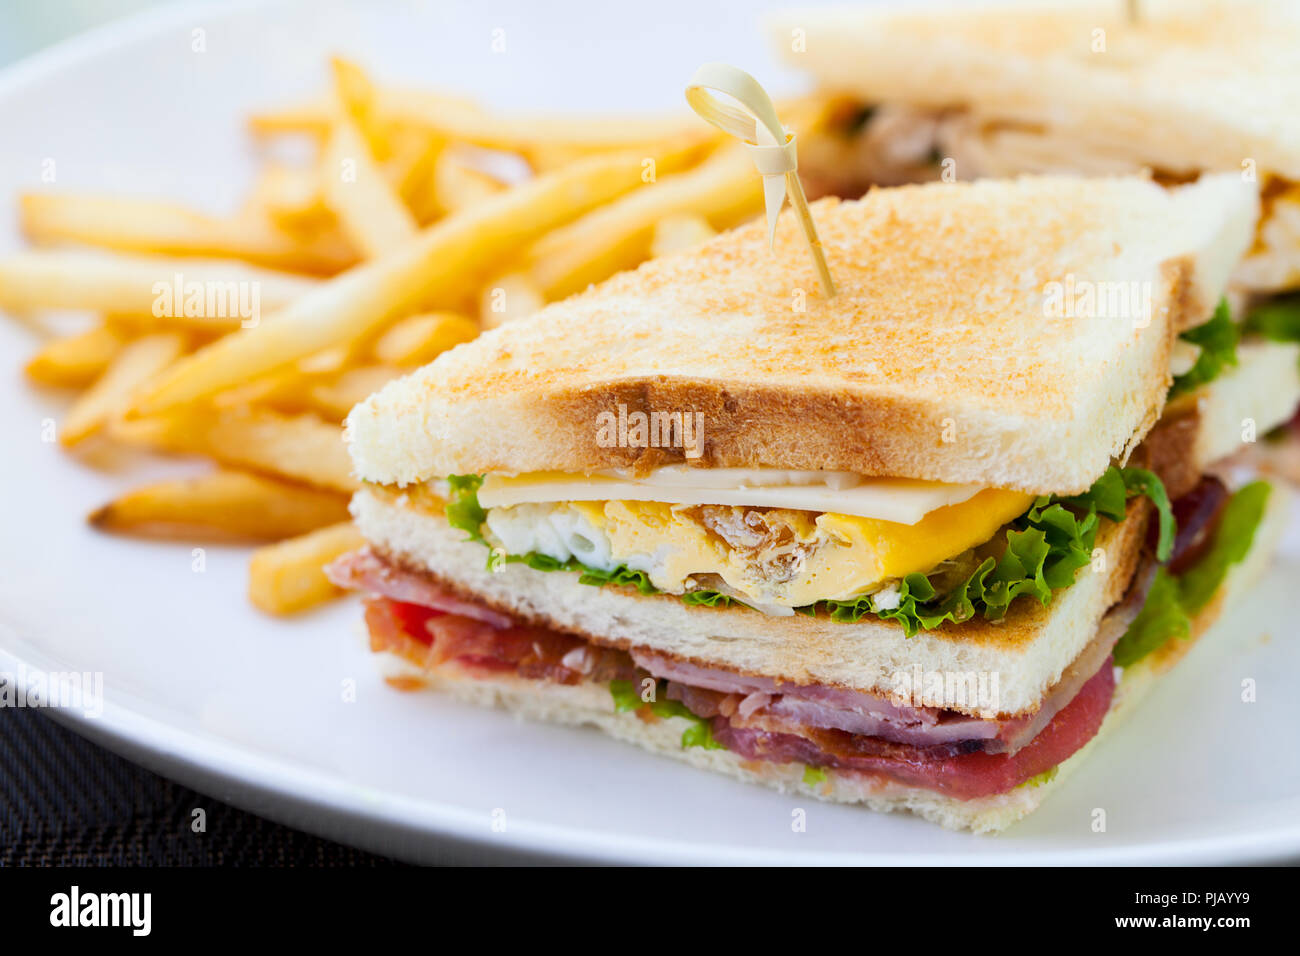 Club sandwich with french fries on a white plate. Close up. Stock Photo